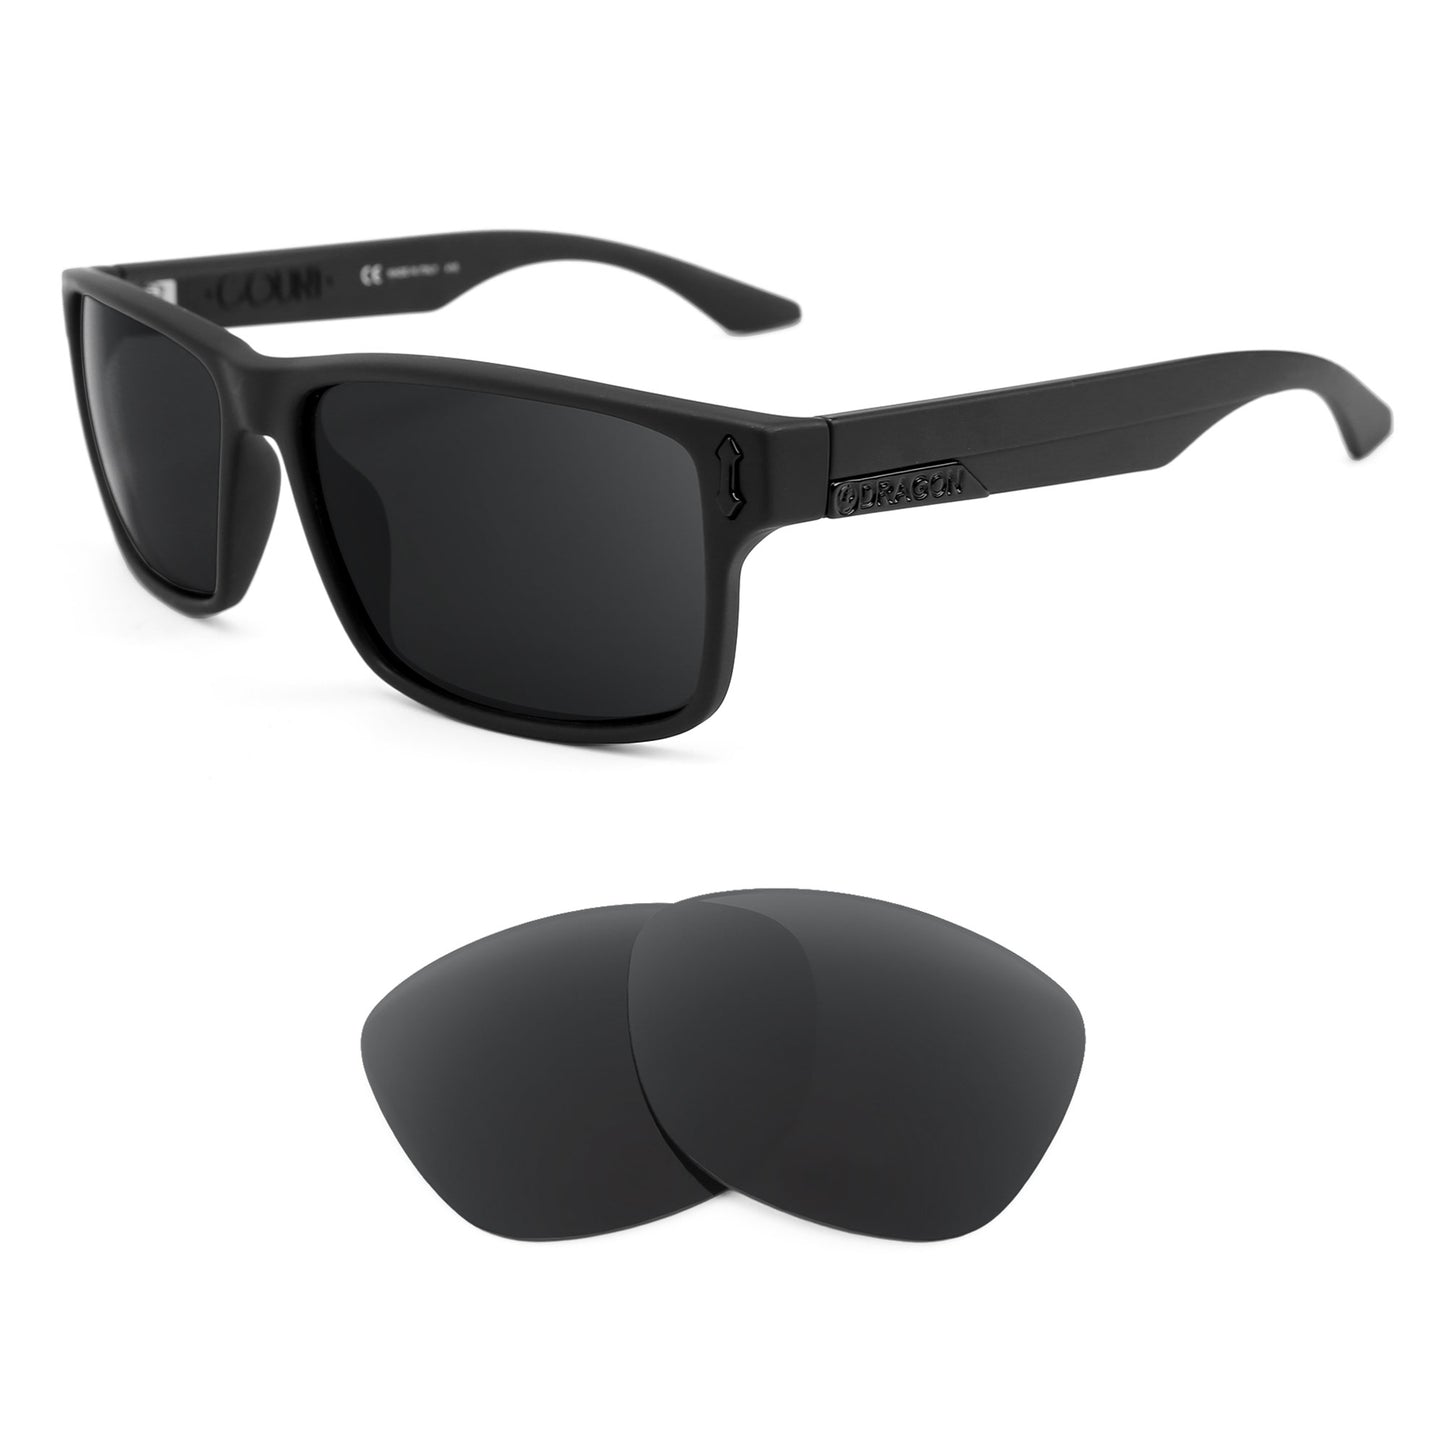 Dragon Count sunglasses with replacement lenses